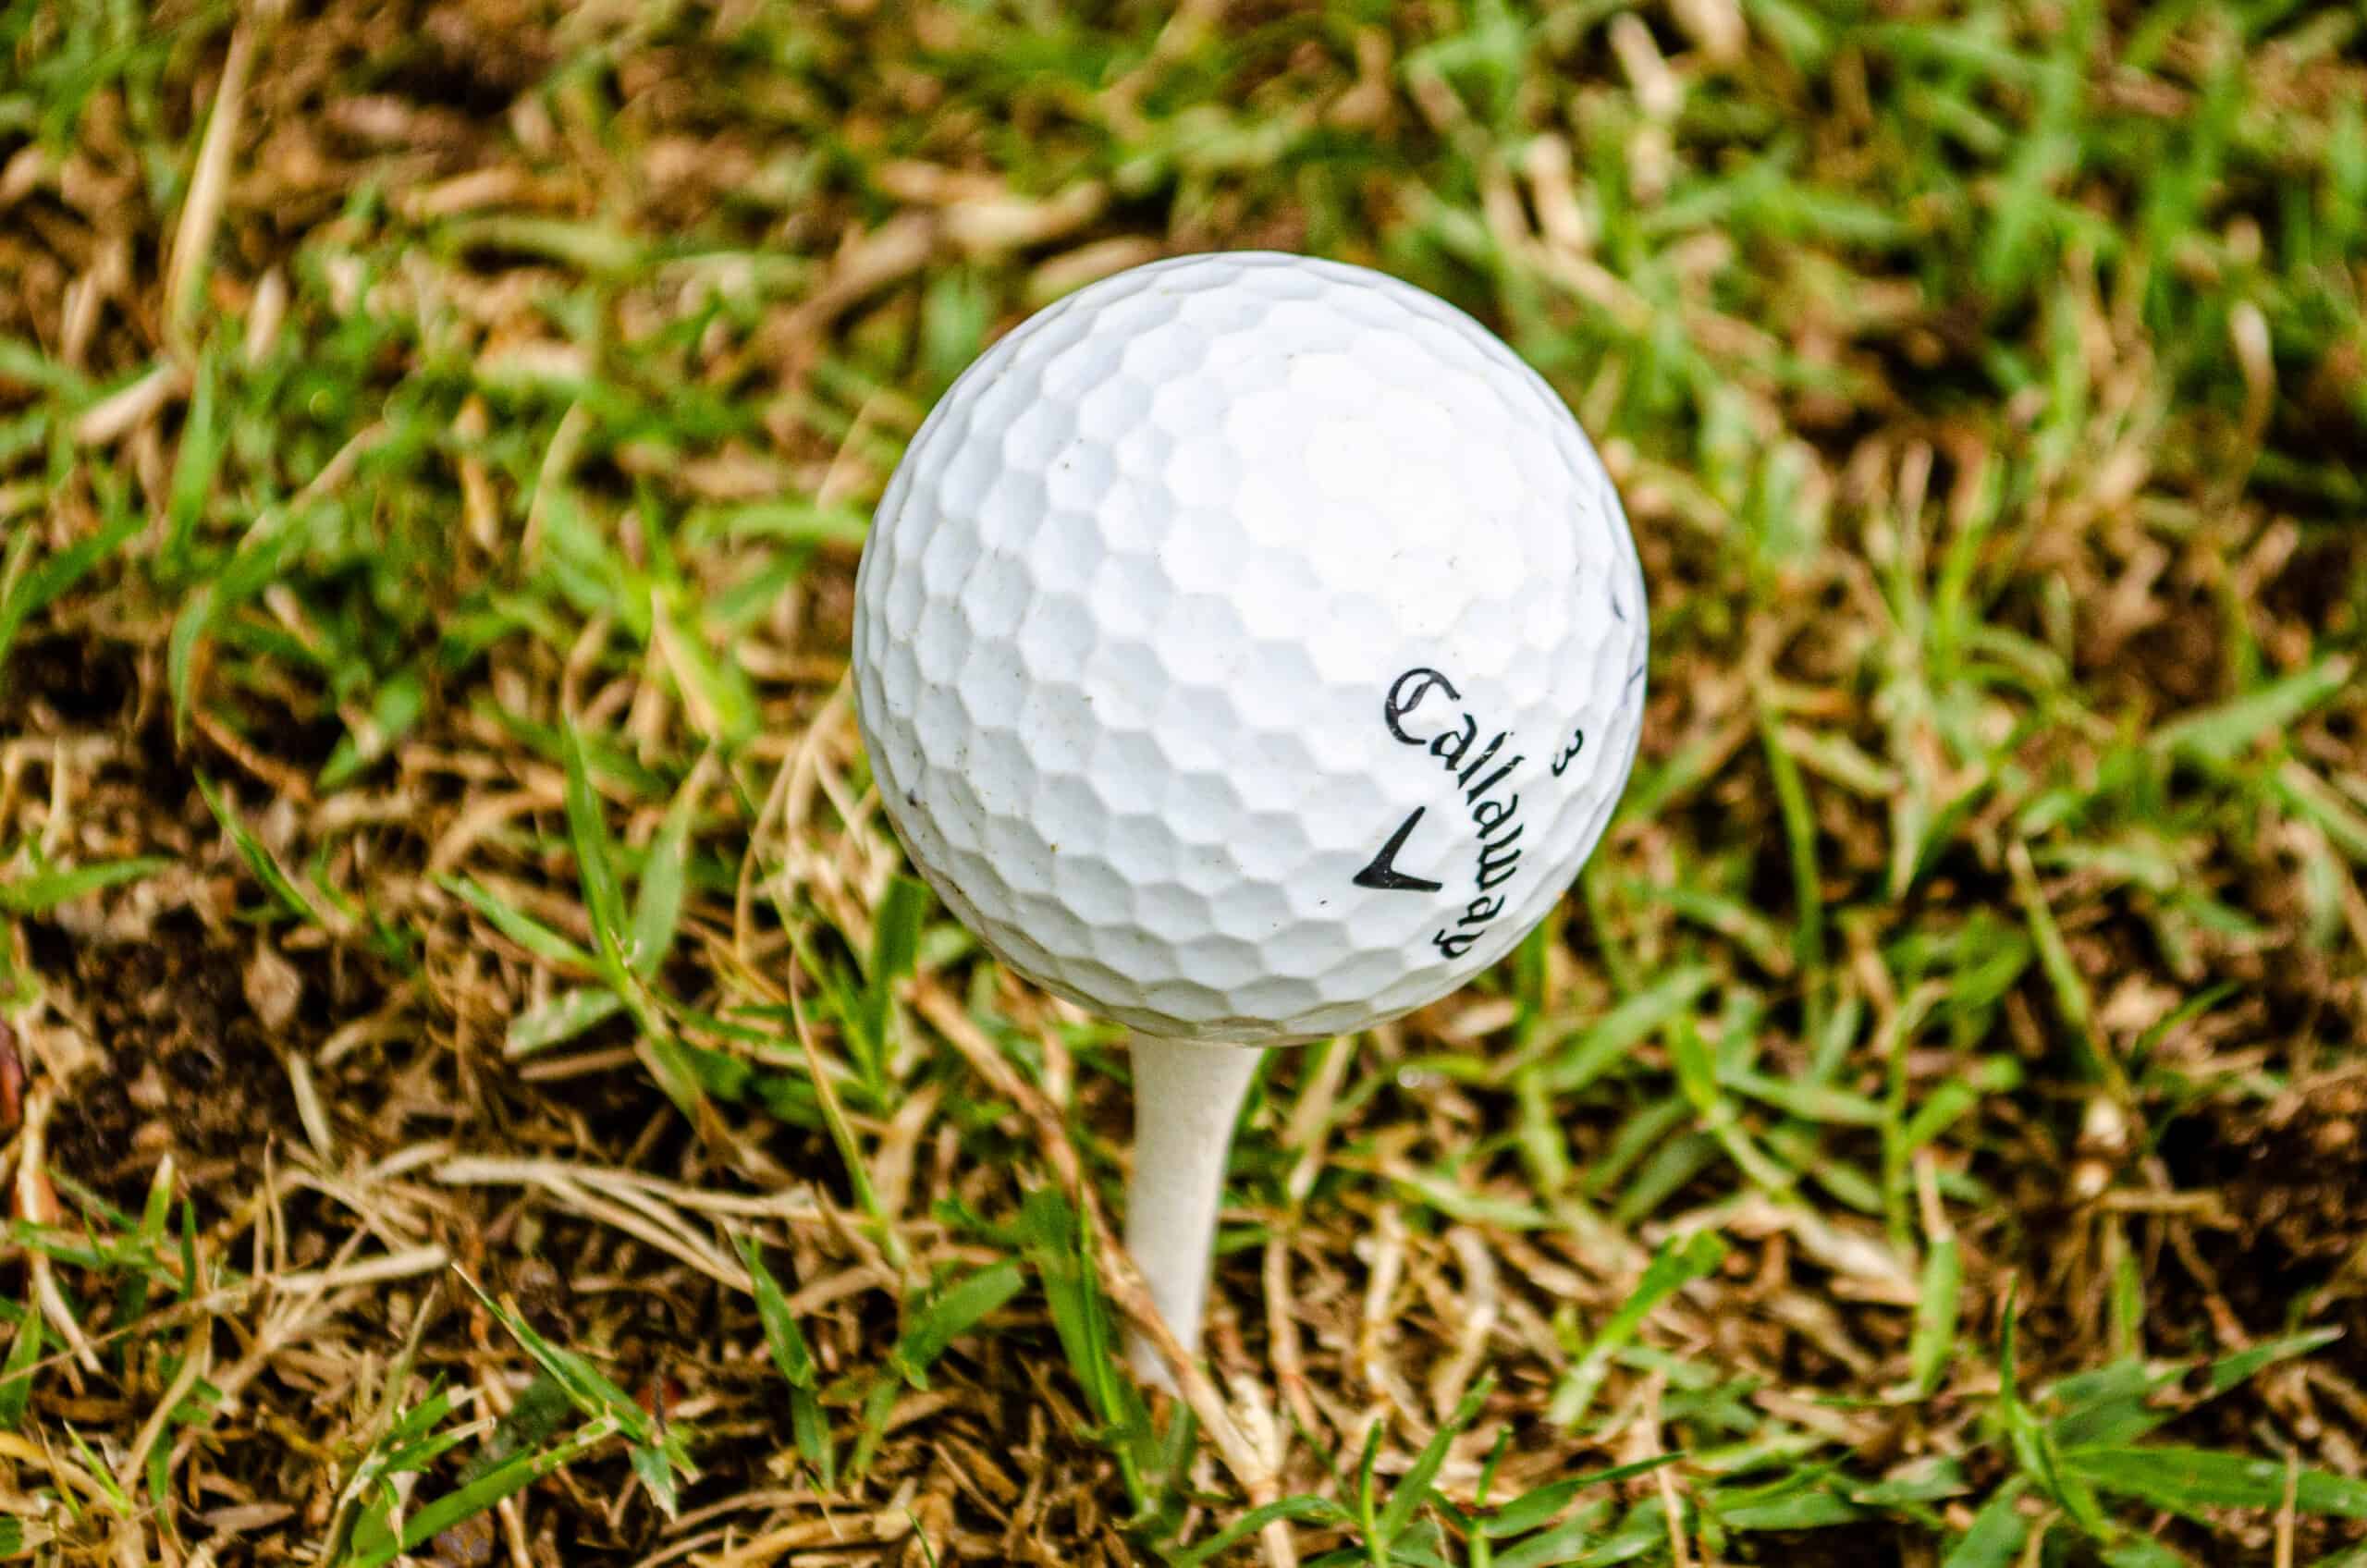 How to Sell Used Golf Balls: A Comprehensive Guide to Making Extra Cash